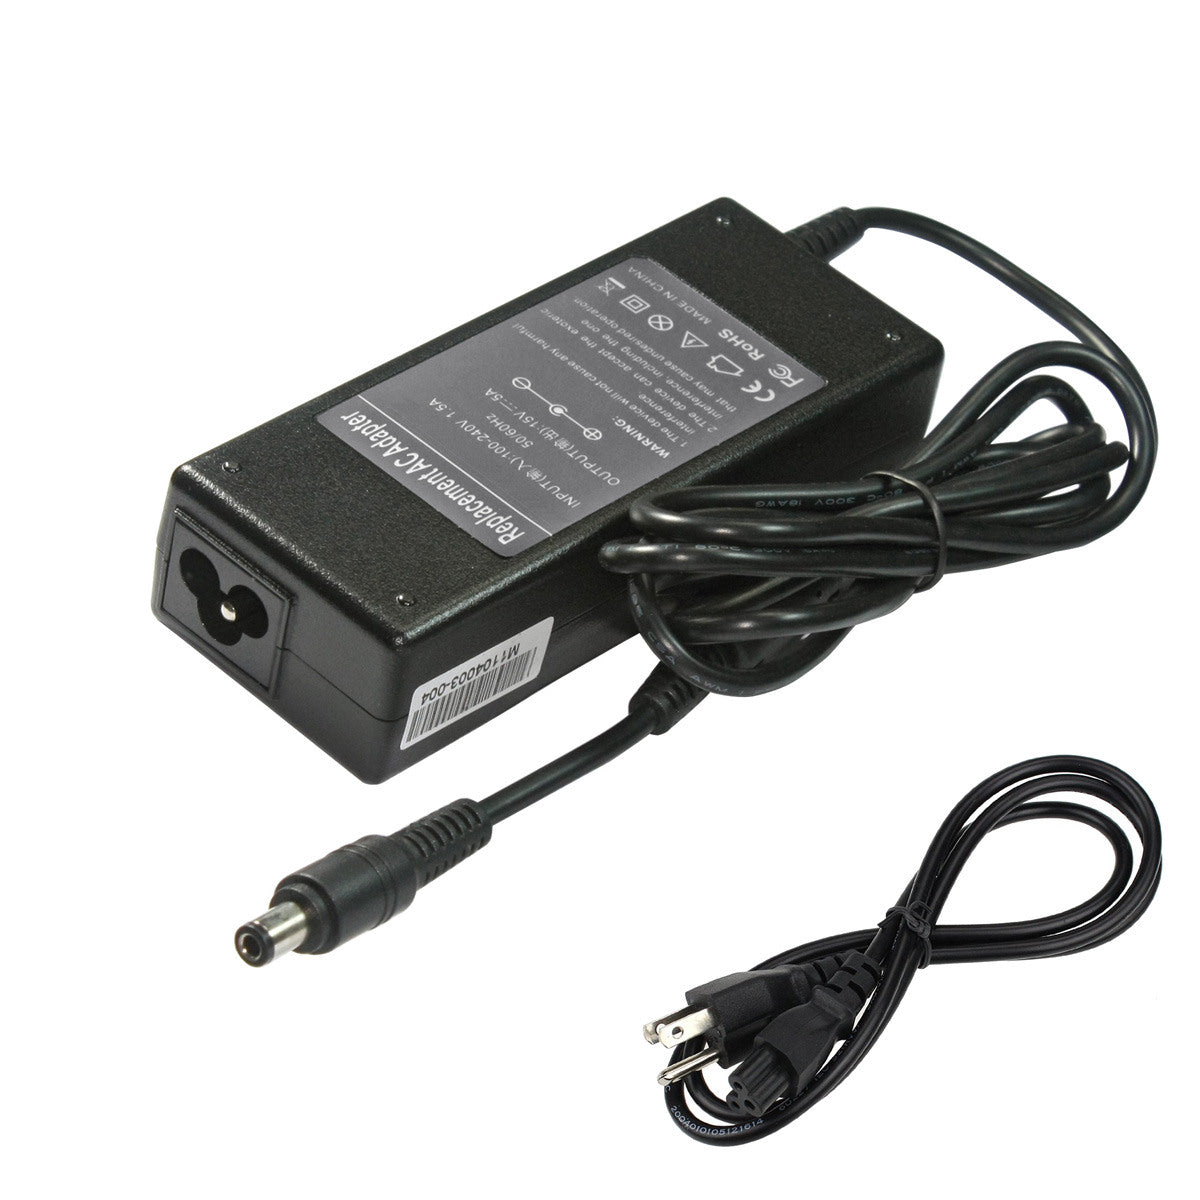 Compatible Replacement Toshiba Satellite PS225U-N91J08 Laptop Charger.